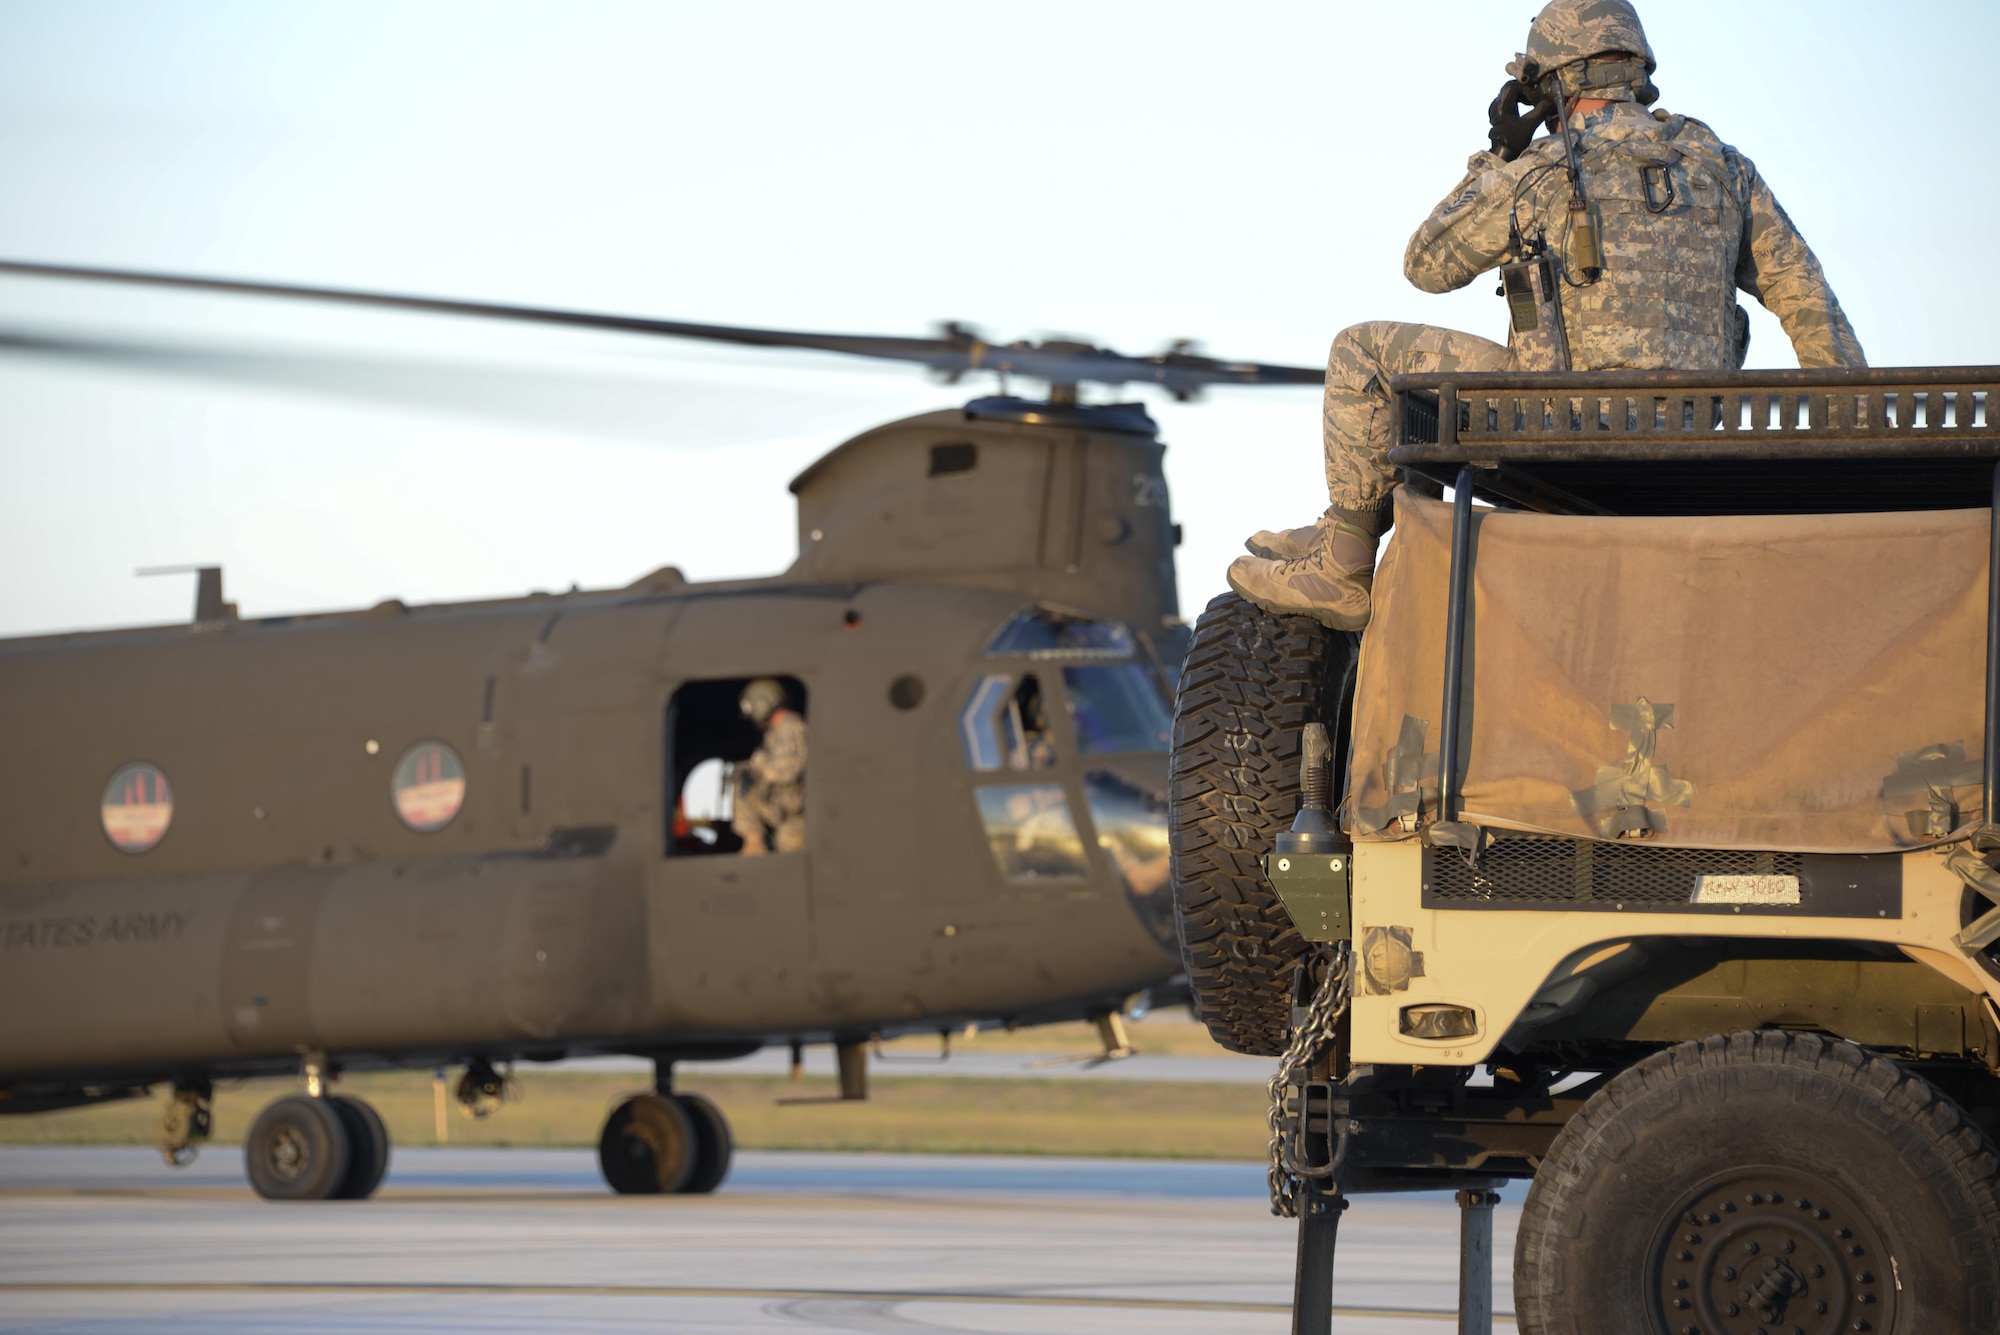 Staff Sgt. William Harden, 921st Contingency Response Squadron ramp coordination instructor, waits for the U.S. Army CH-47 Chinook to takeoff during Exercise Northern Strike at Alpena Combat Readiness Training Center, Michigan, Aug. 9, 2016. Harden, stationed at Travis Air Force Base, California, participated in a sling load exercise to practice attaching a HUMVEE to a Chinook. (U.S. Air Force photo by Senior Airman Amber Carter)